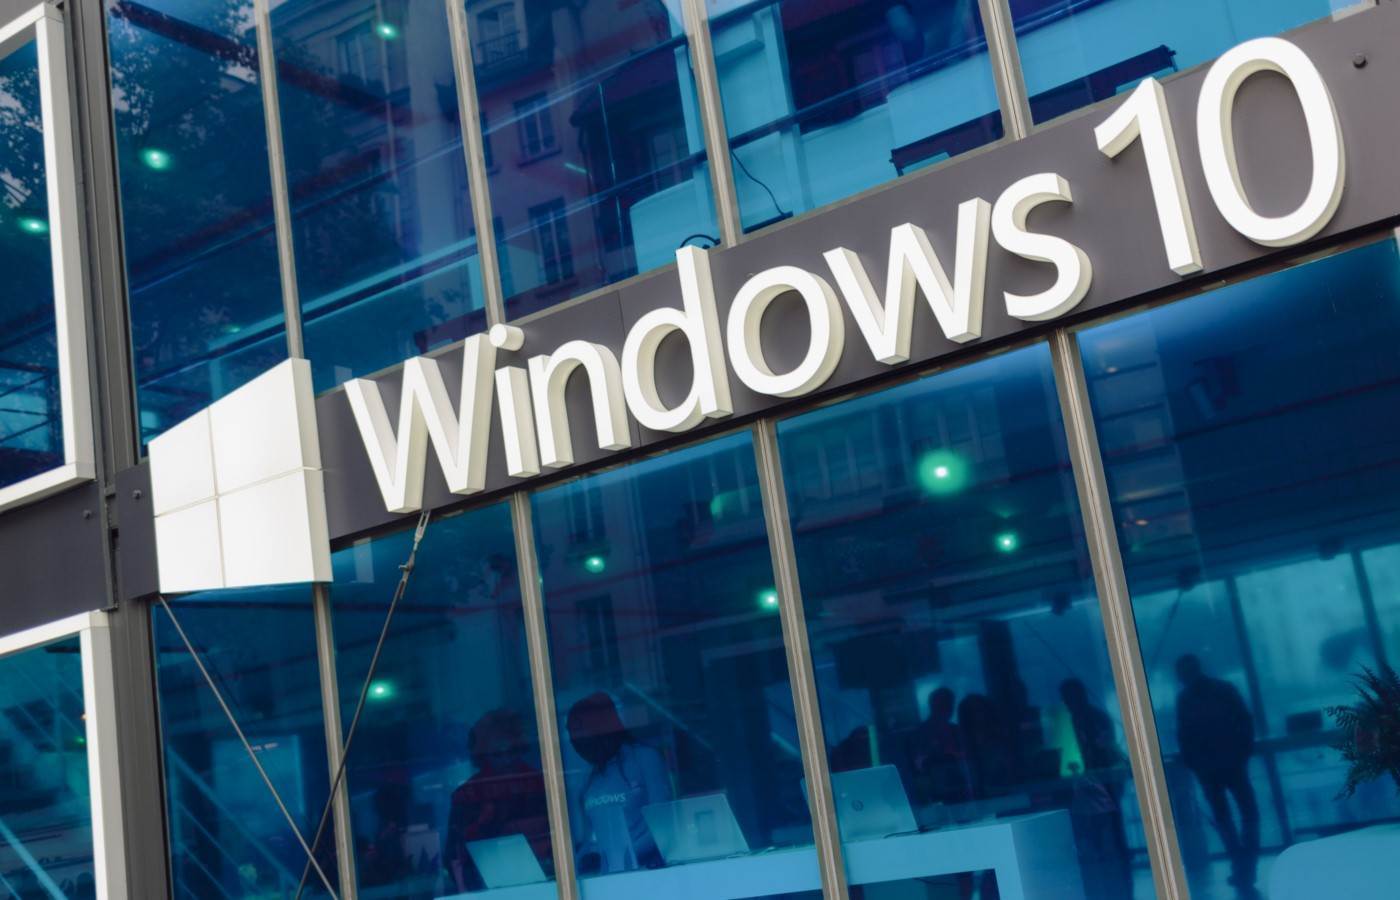 Microsoft ending support for Windows 10 could send 240 million…